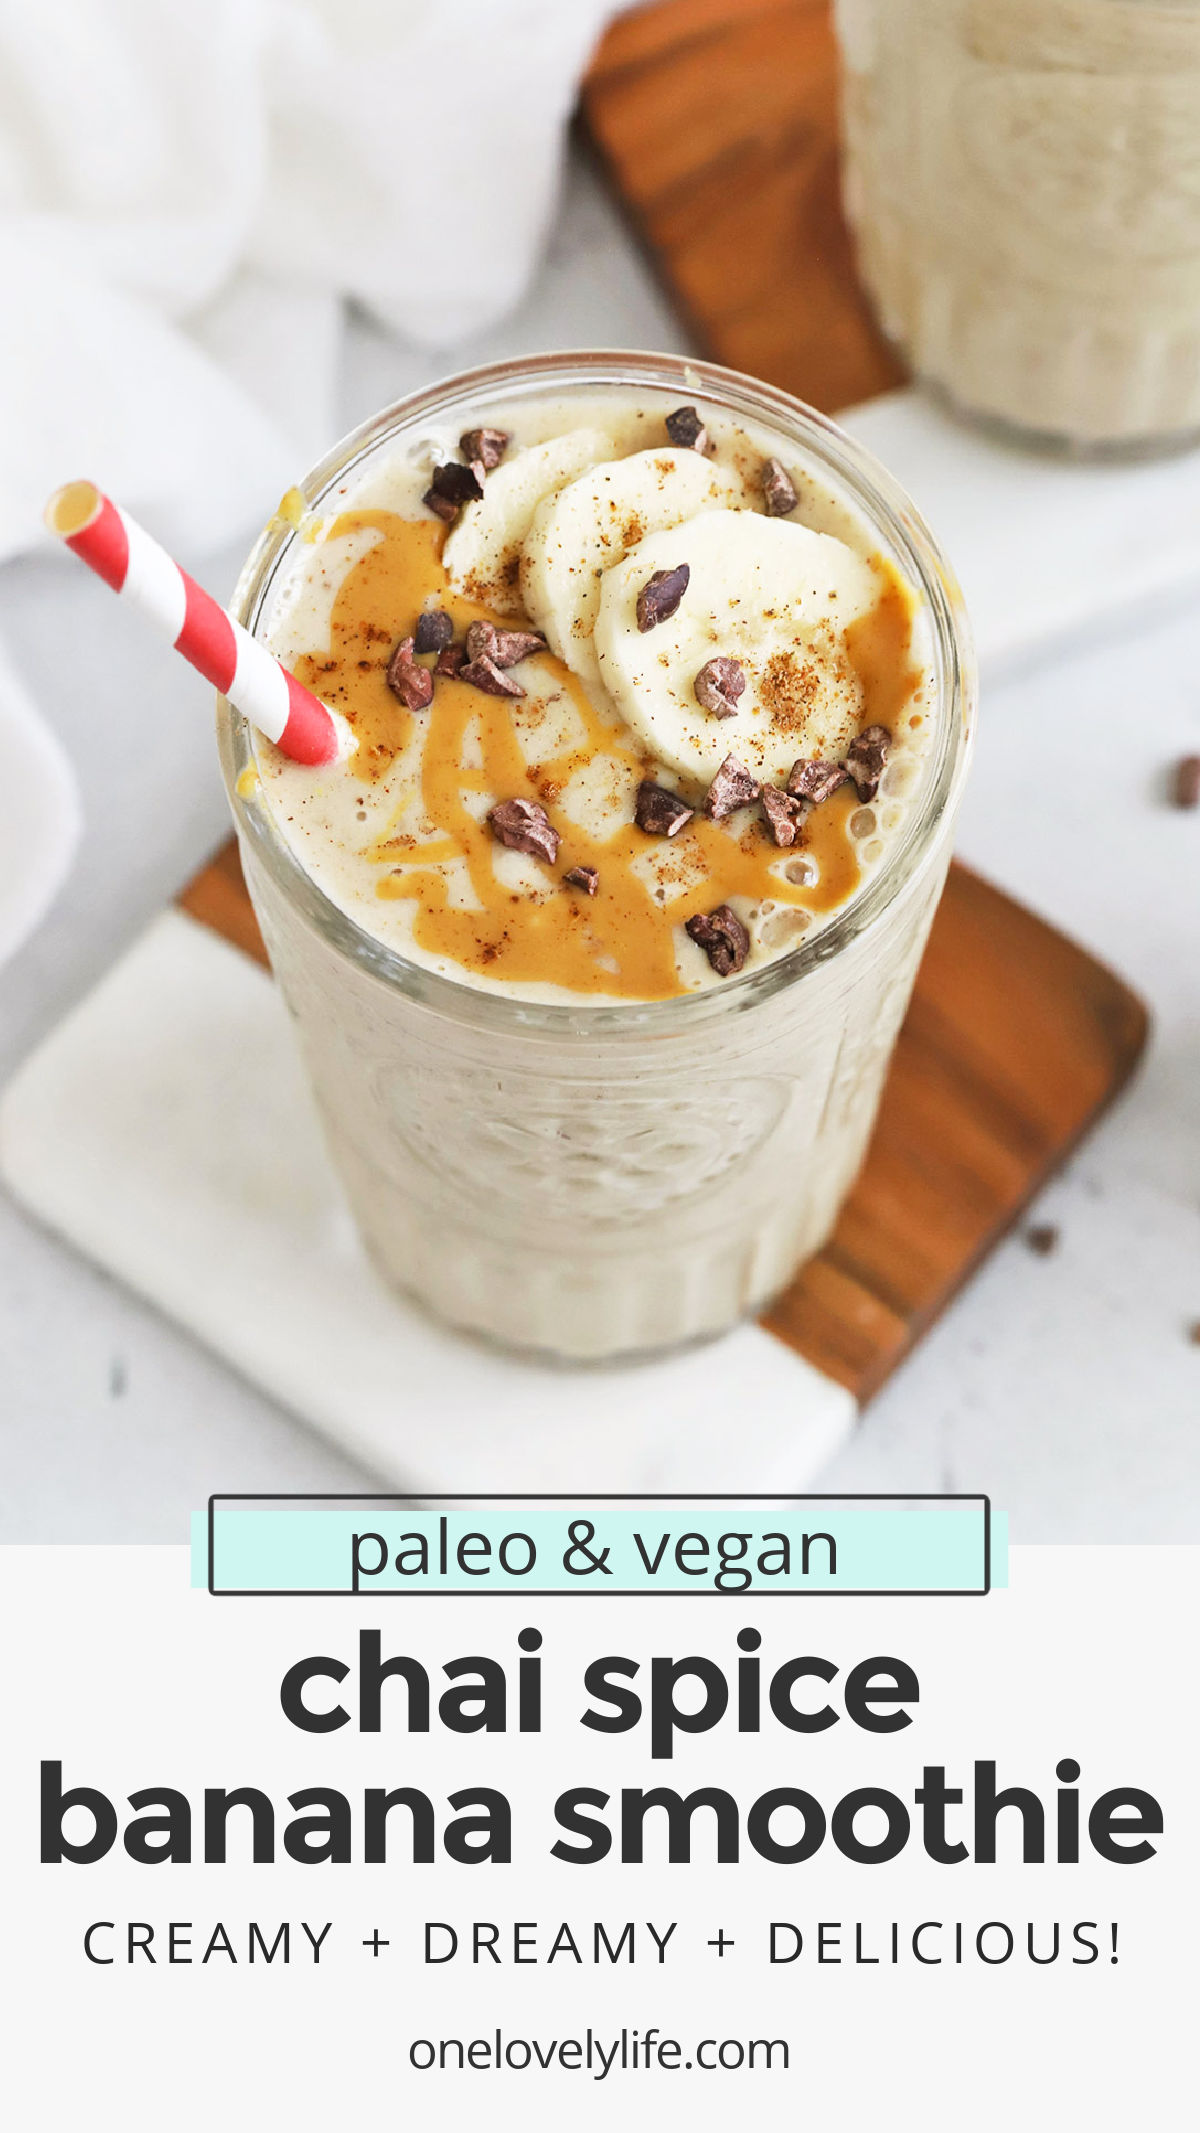 Chai Spiced Banana Smoothies - This chai banana smoothie is such a yummy change of pace! It's perfect all year long. (Paleo, Vegan) // Chai Spice Banana Smoothie // Banana Smoothie Recipe // Banana Chai Smoothie // Fall Smoothie // Winter Smoothie // Paleo Smoothie // Vegan Smoothie #smoothie #chai #banana #chaispice